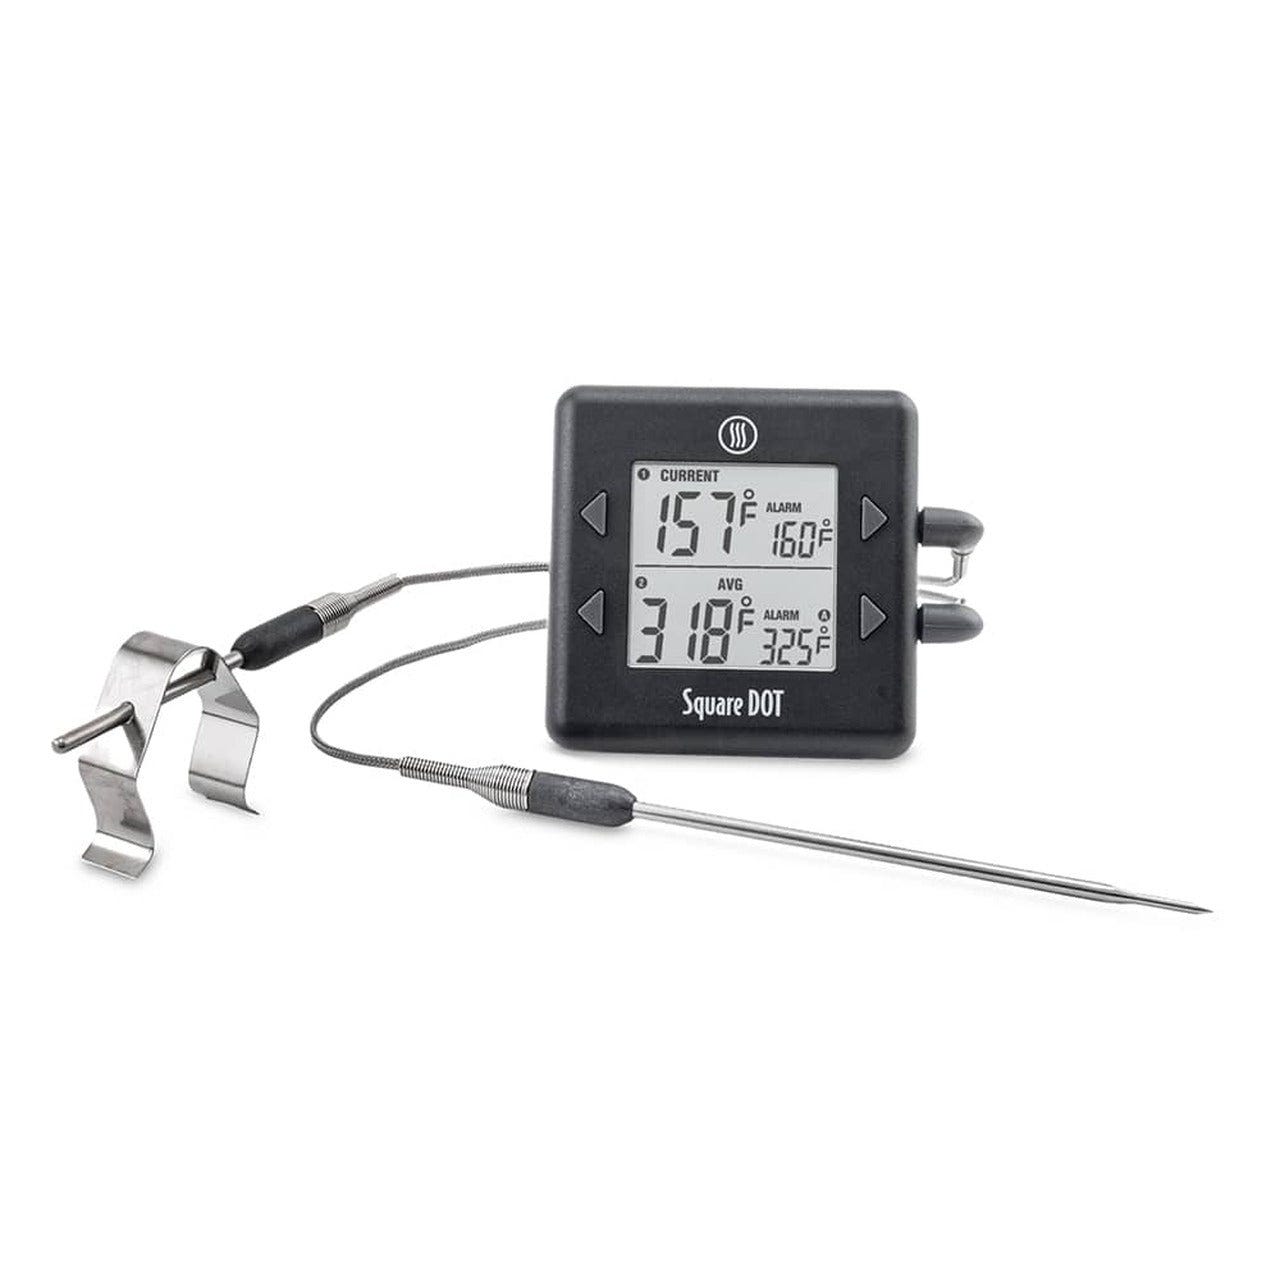 A digital thermometer with two probes attached